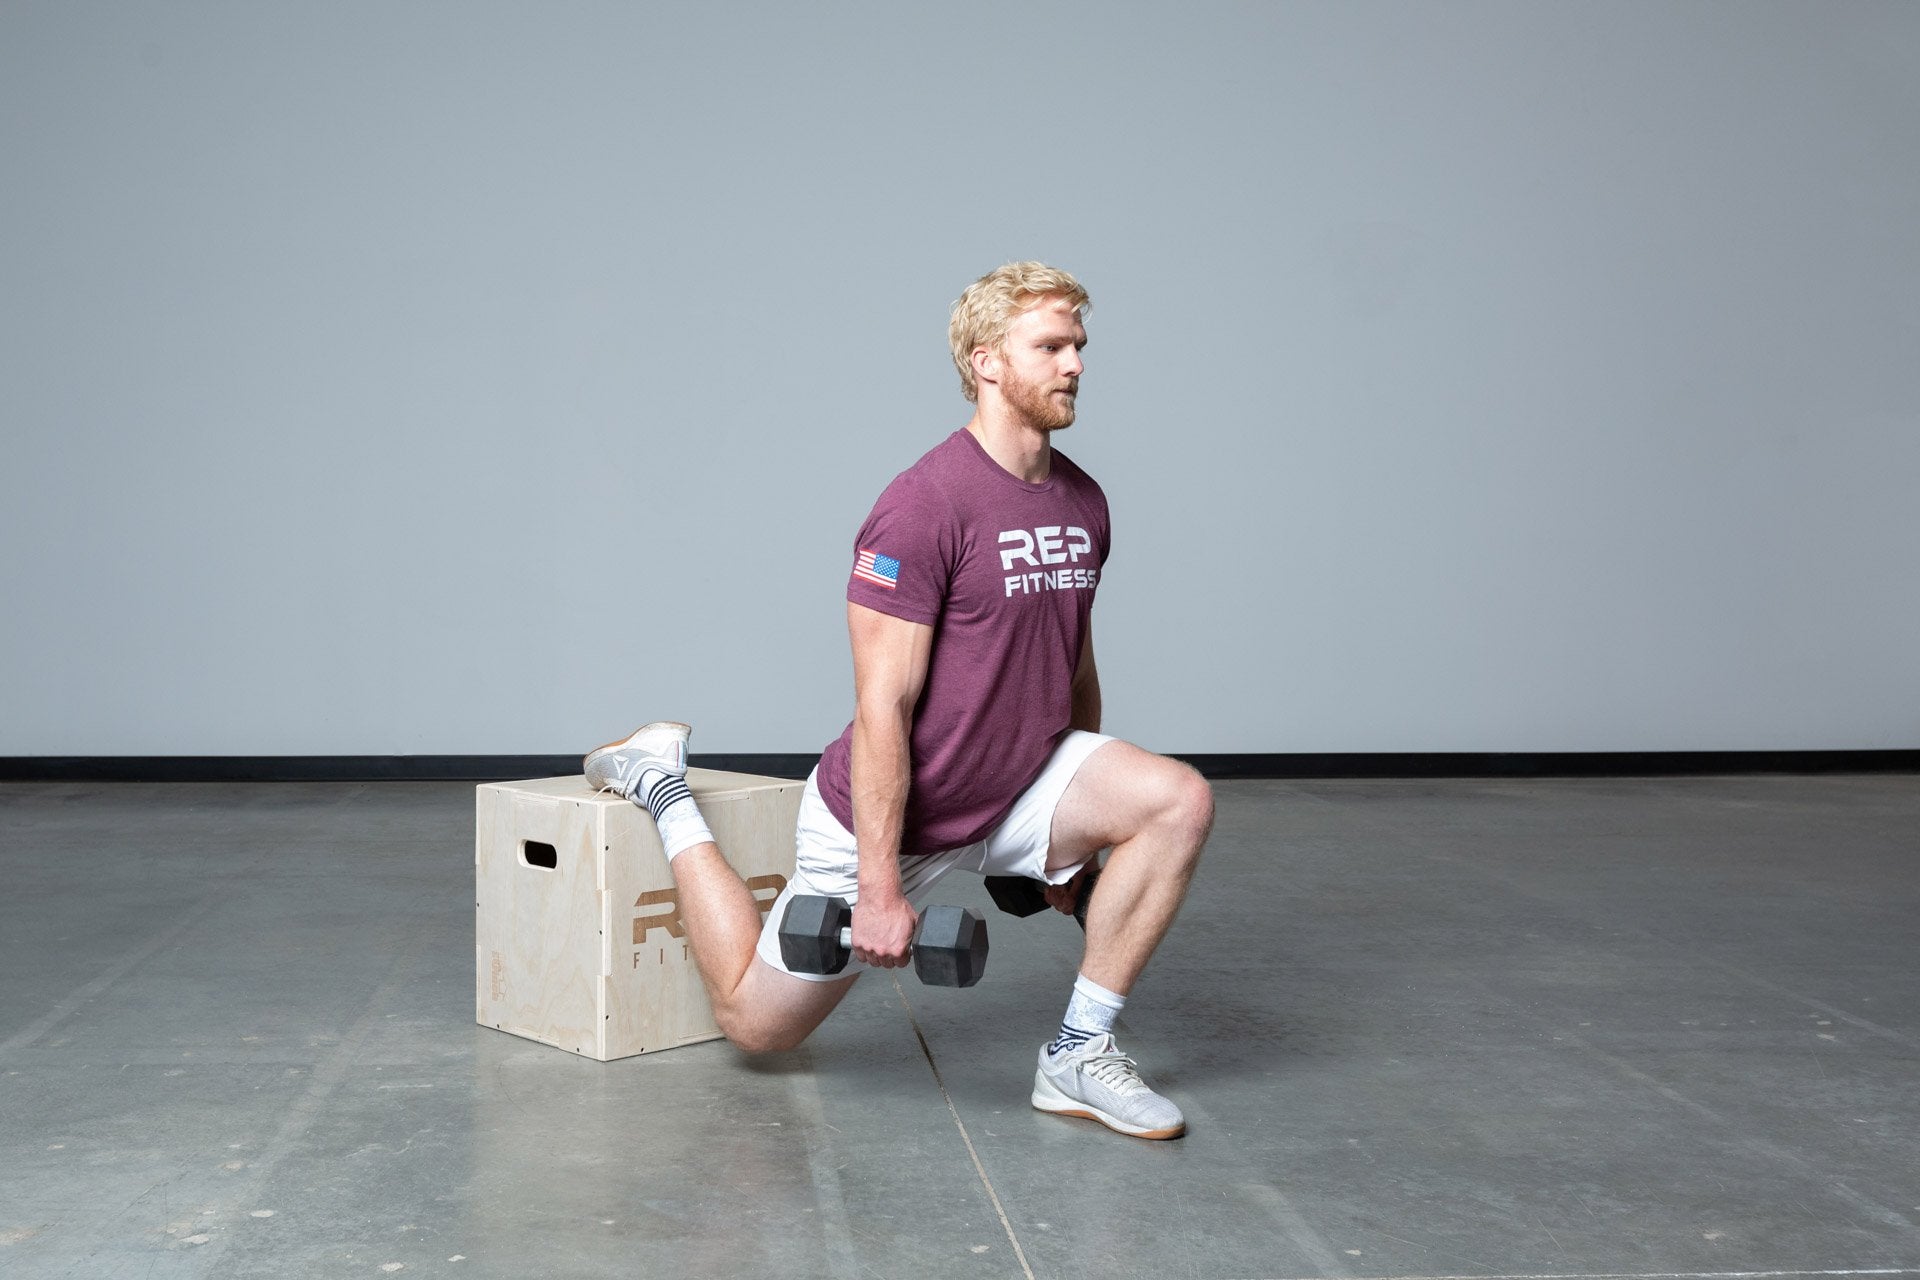 Lifter performing weighted split squats on an In-Between REP 3-in-1 Wood Plyo Box.